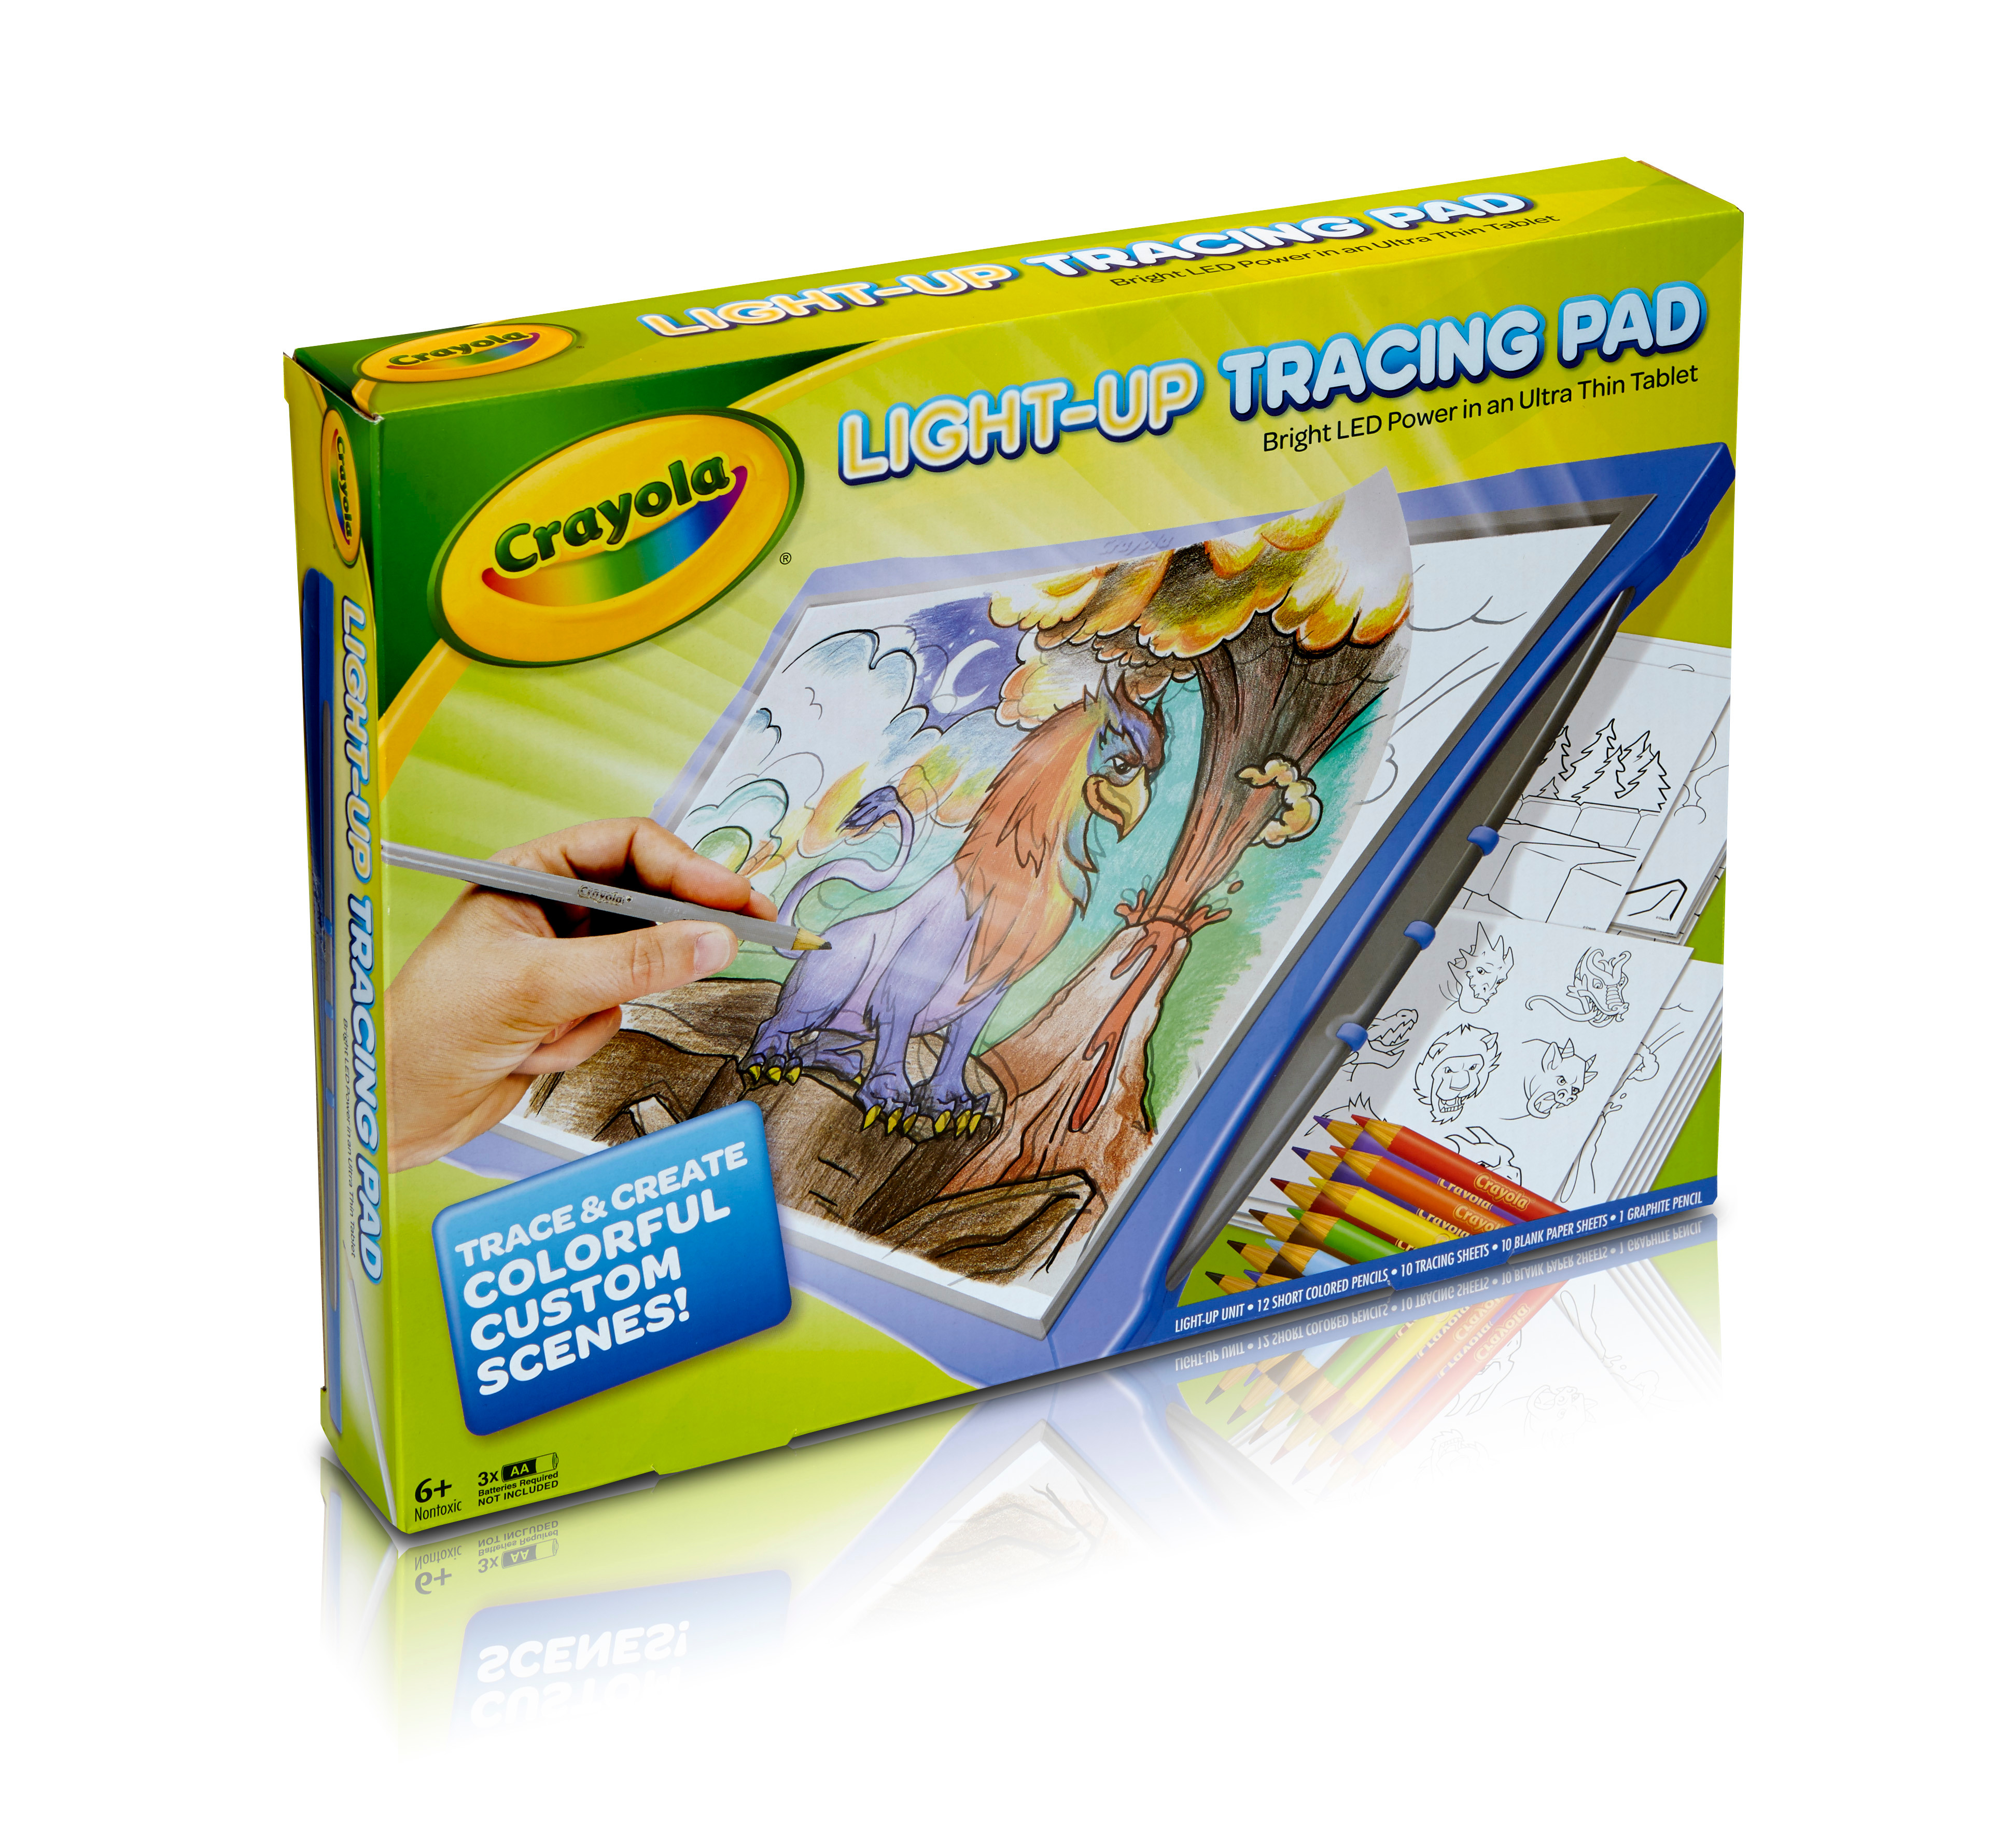 Crayola Light-Up Tracing Pad, Blue, School Supplies, Art Set, Gifts for Girls & Boys, Beginner Child - image 3 of 9